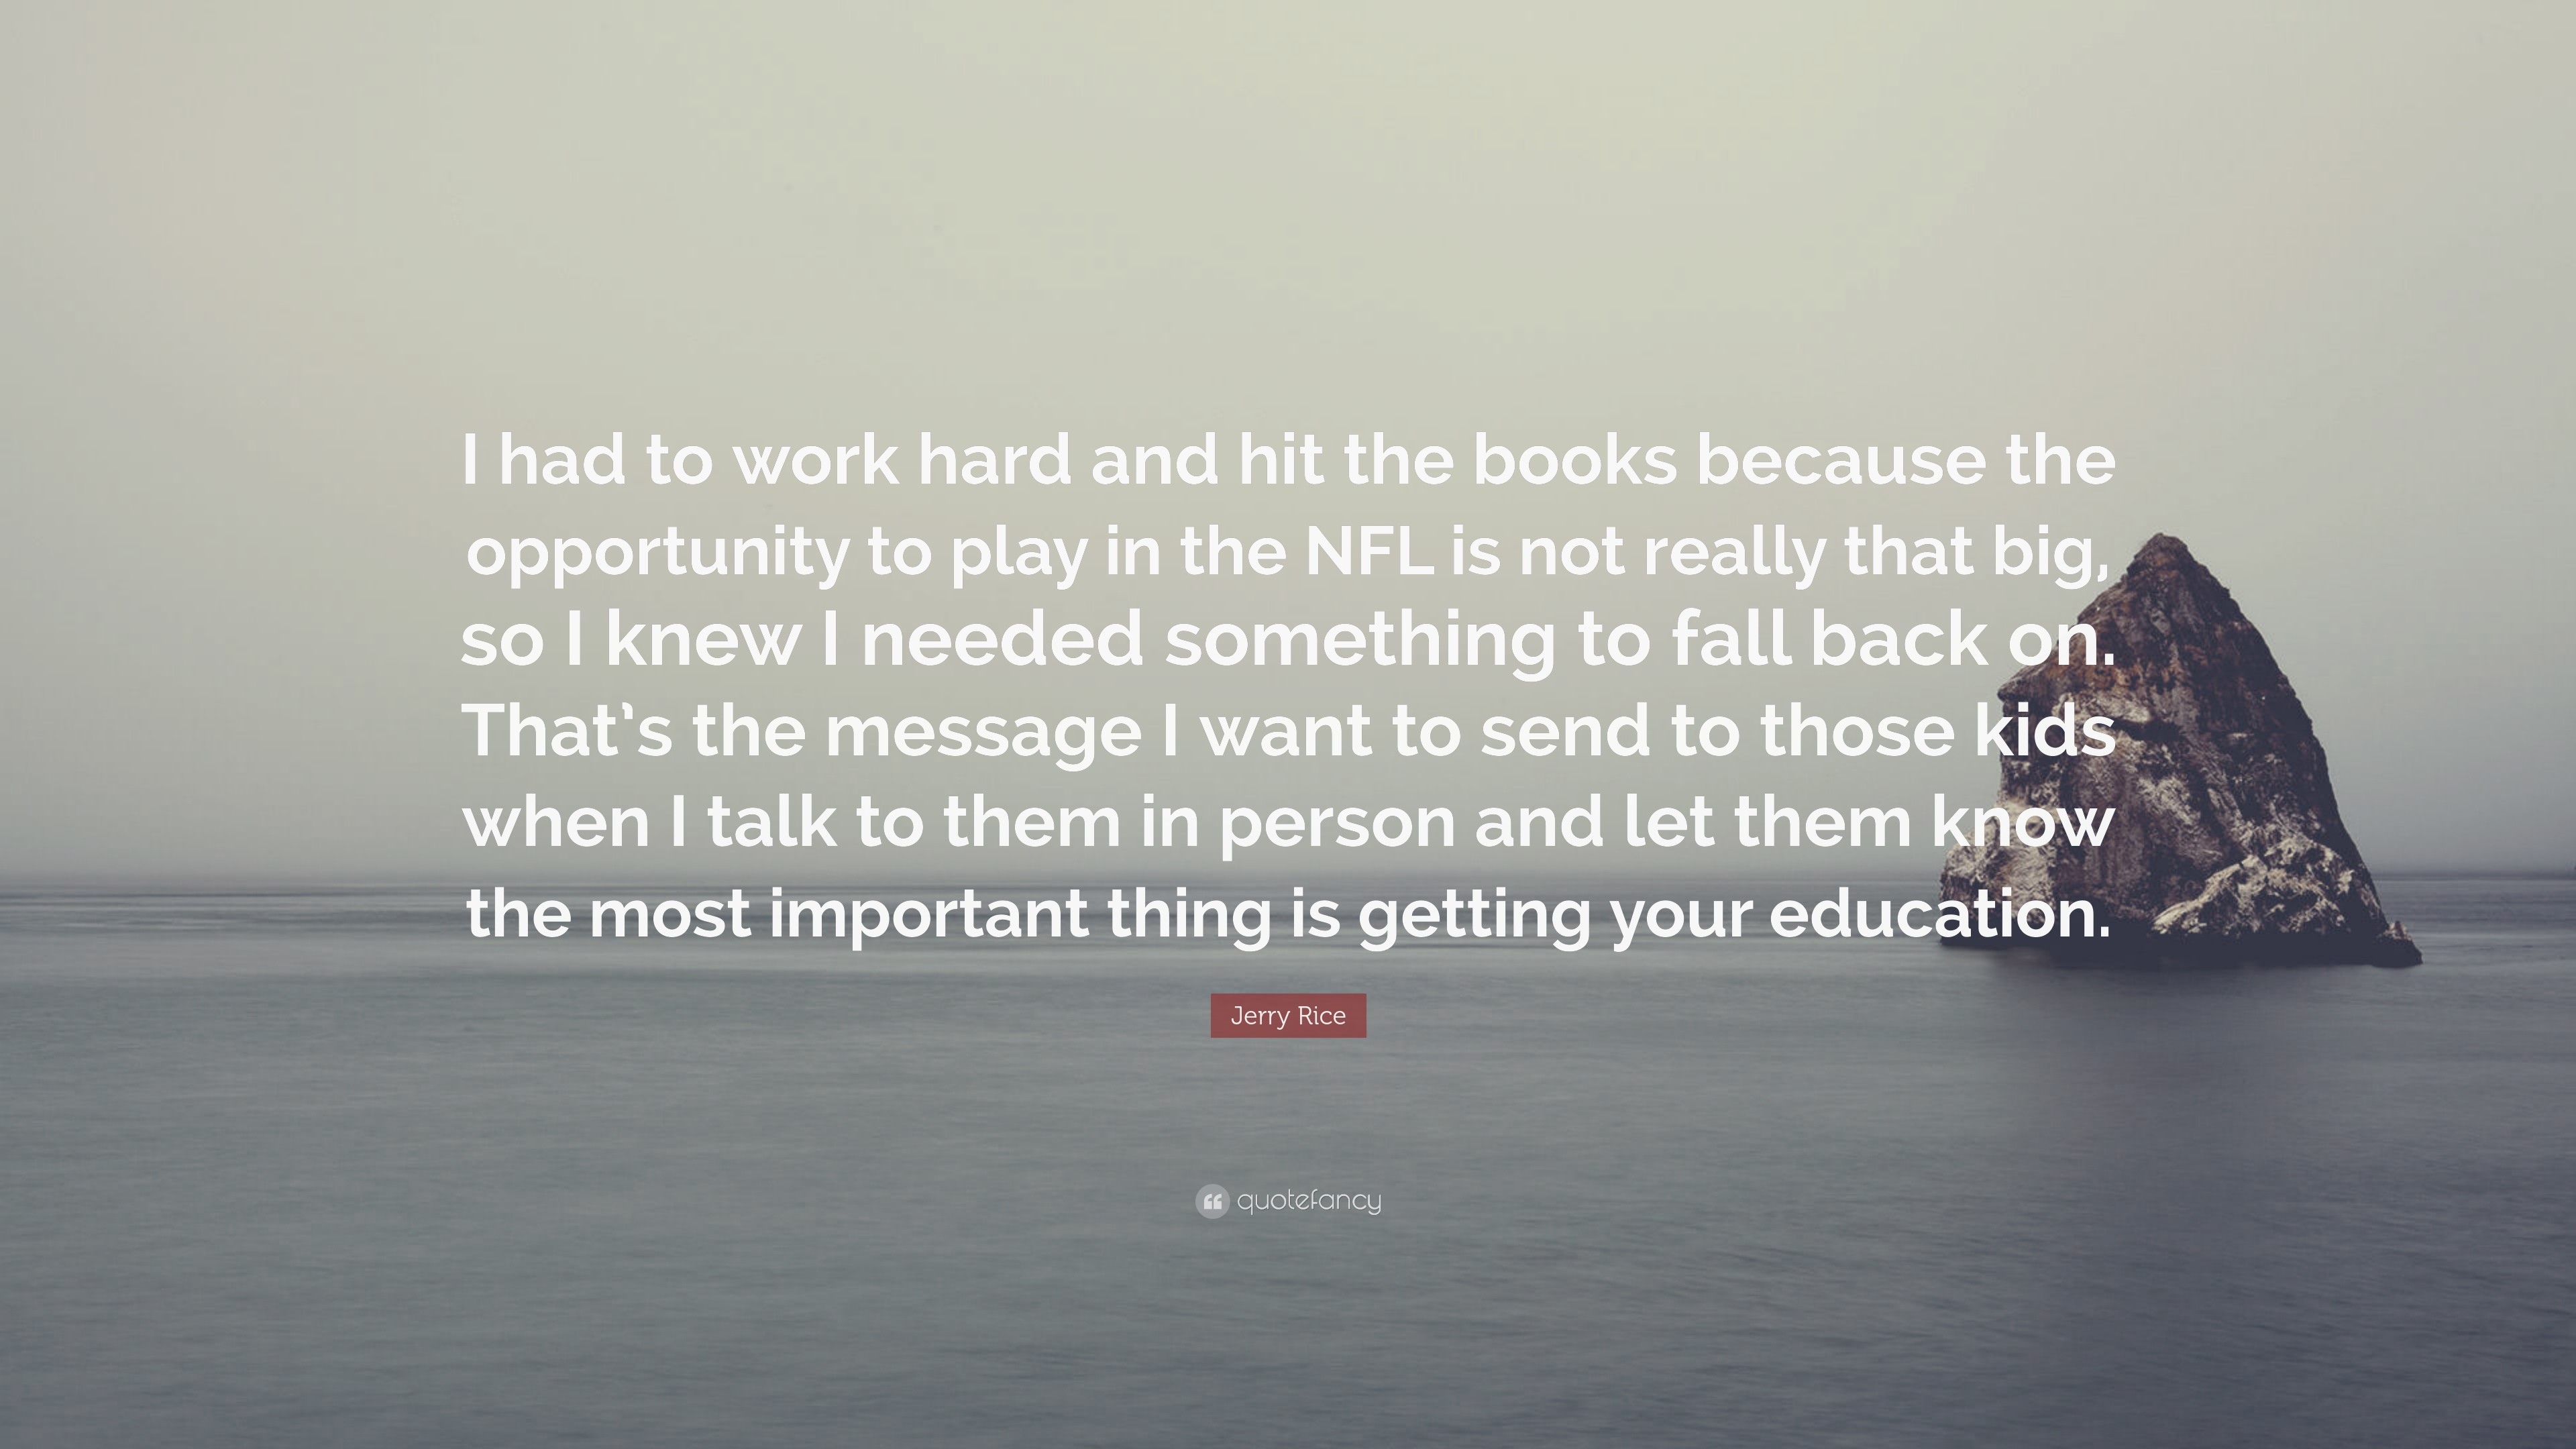 3840x2160 Jerry Rice Quote: “I had to work hard and hit the books because the